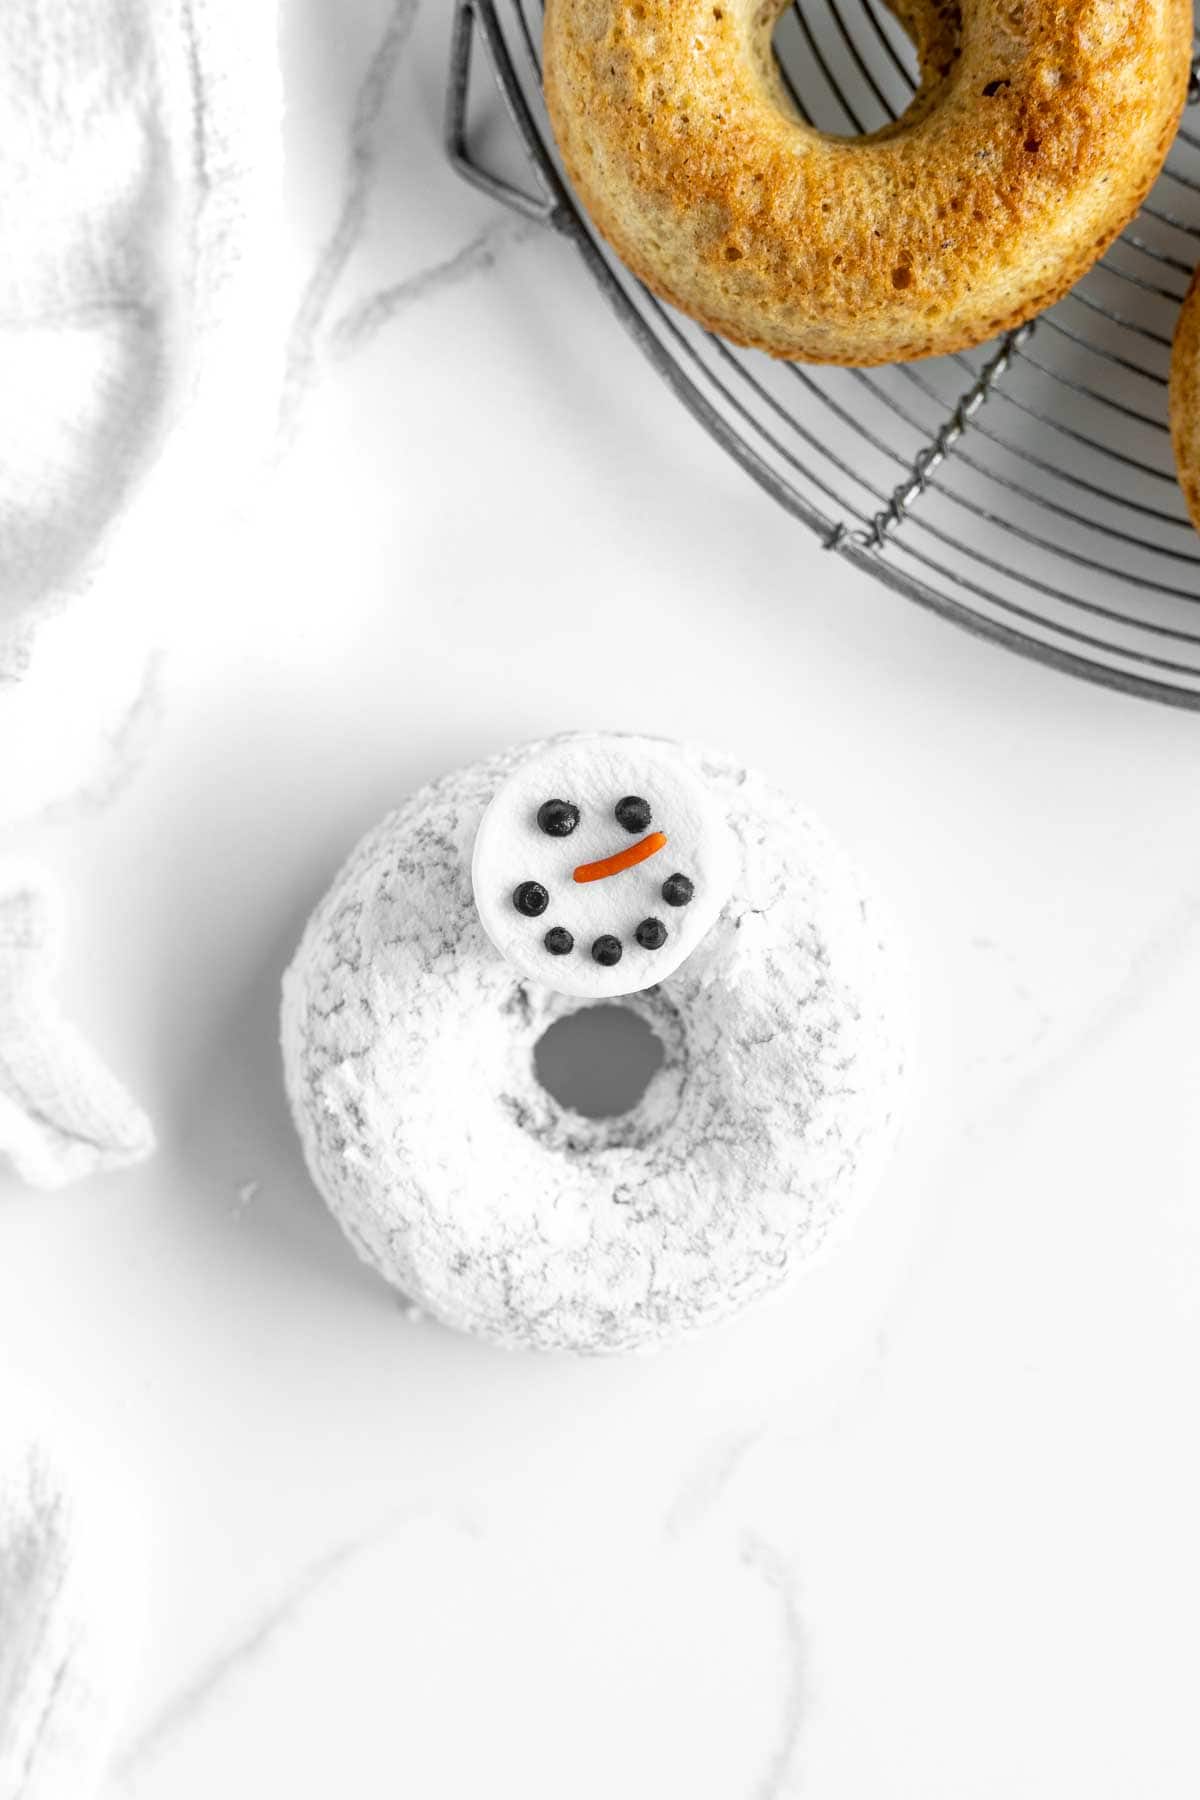 Snowman head decorated with black icing and orange sprinkle.